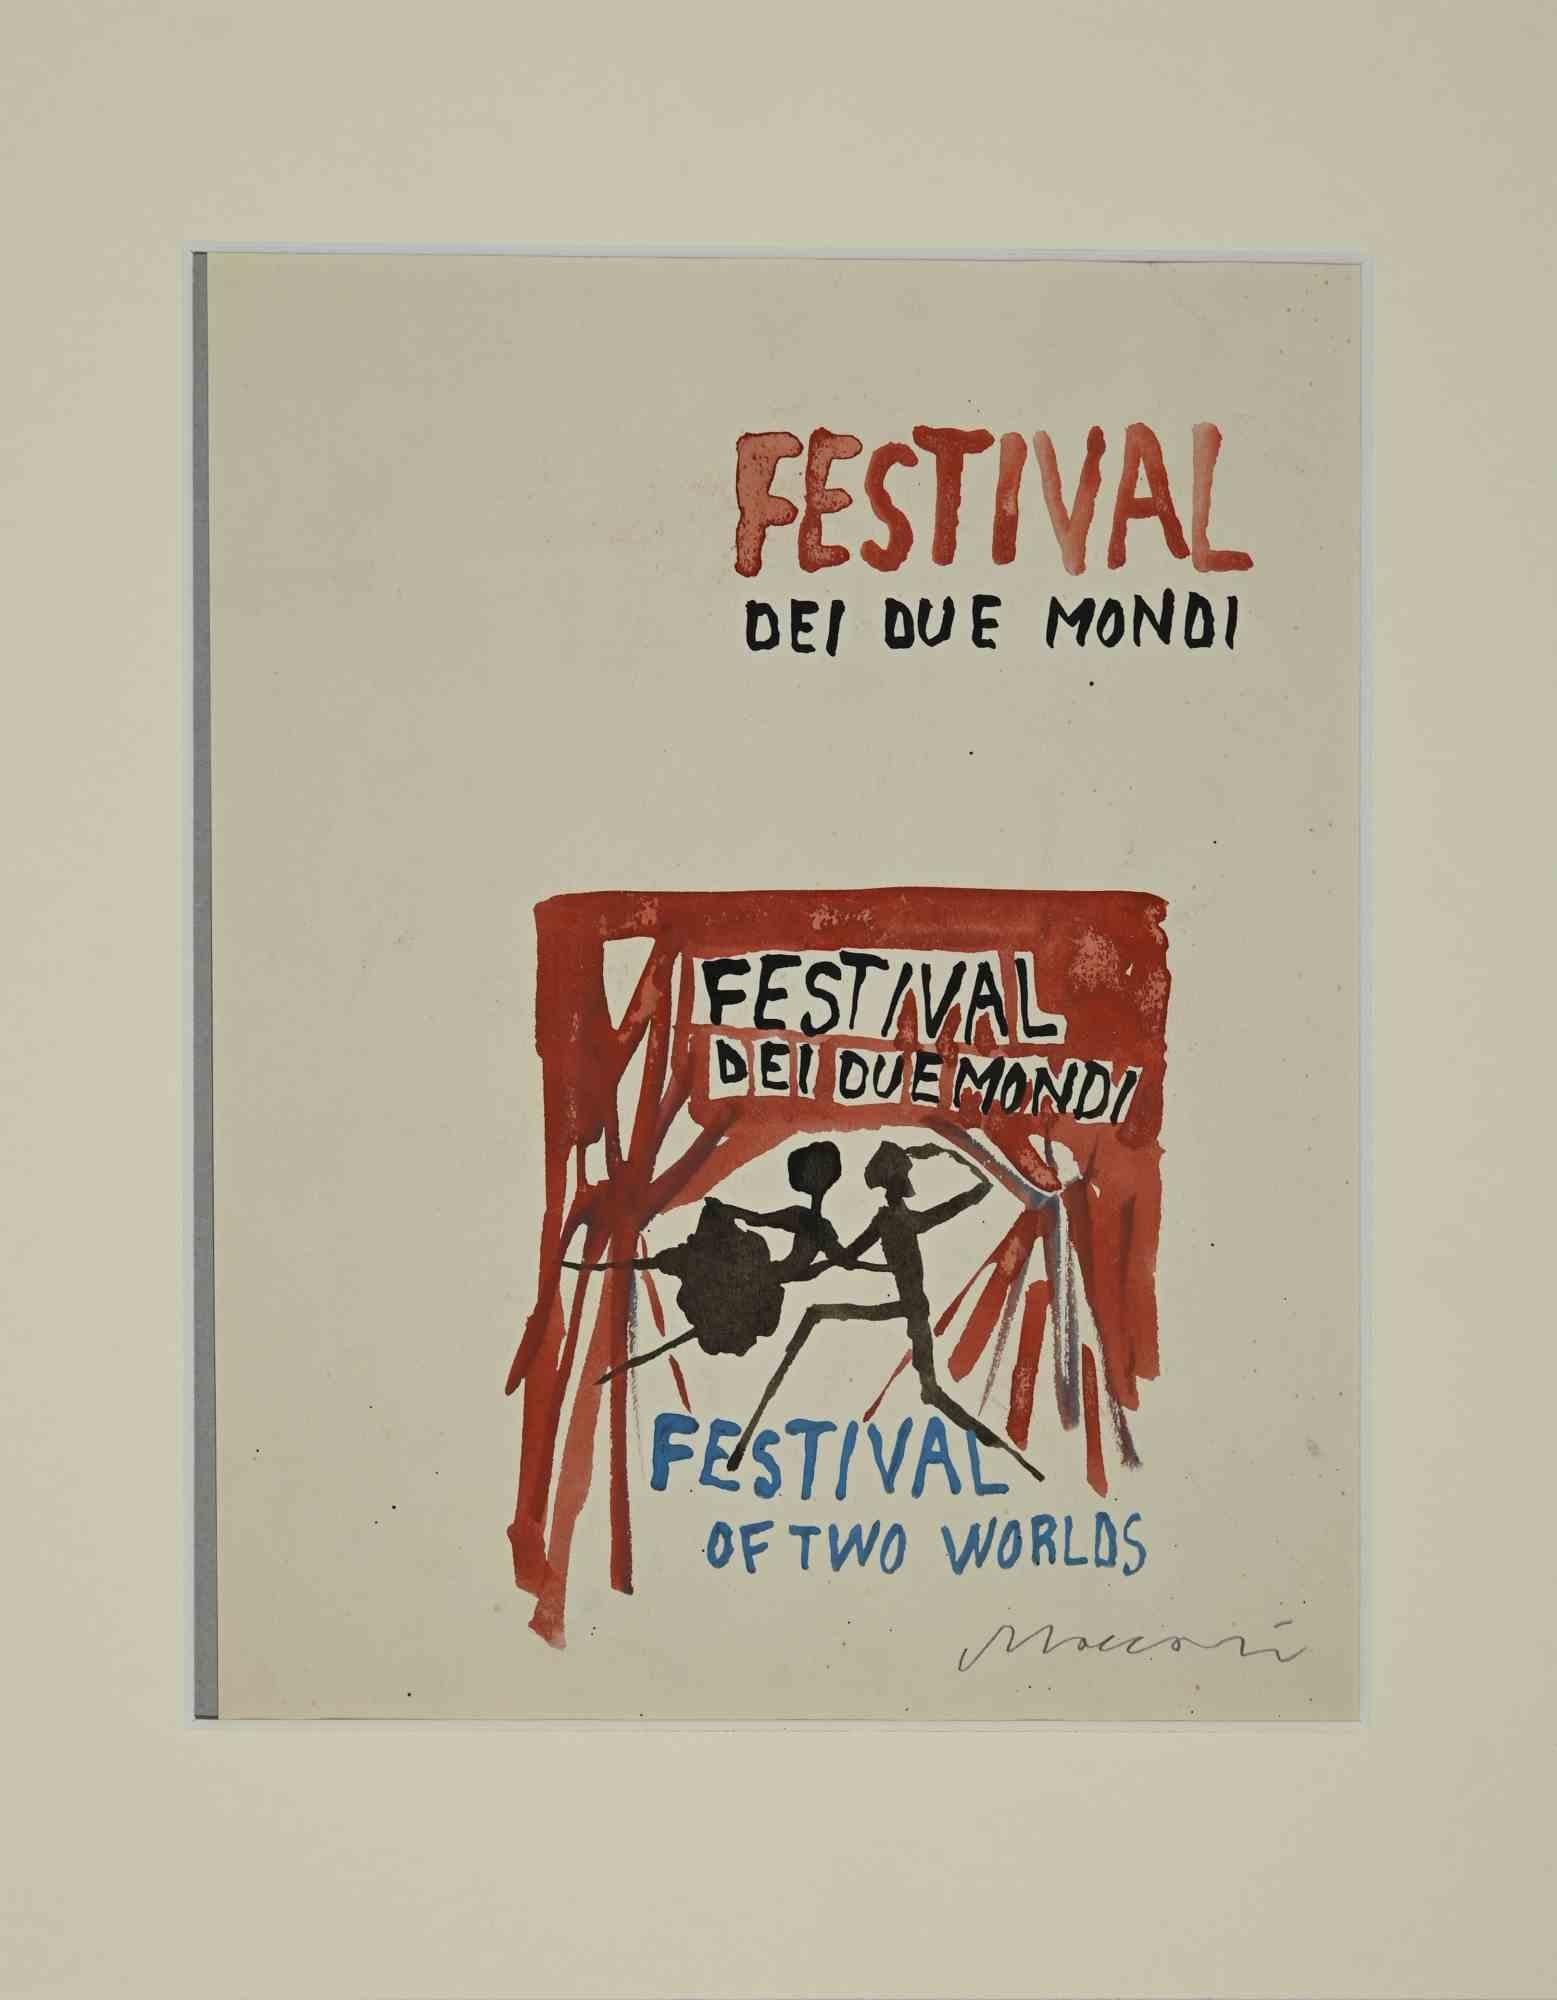 Festival of Two Worlds - Drawing by Mino Maccari - 1960s